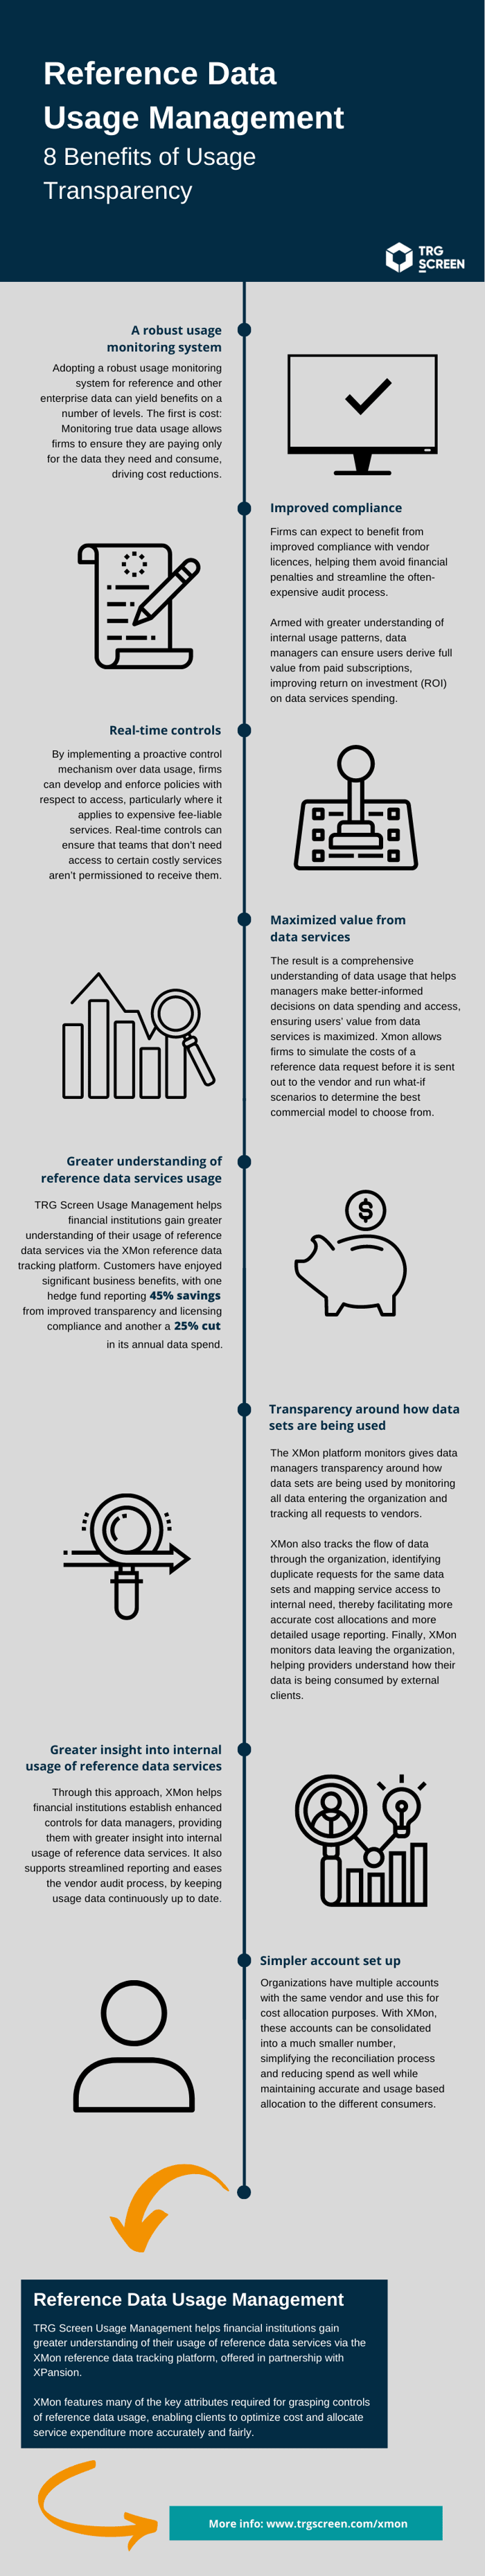 8-Benefits-of-Reference-Data-Usage-Transparency-Infographic